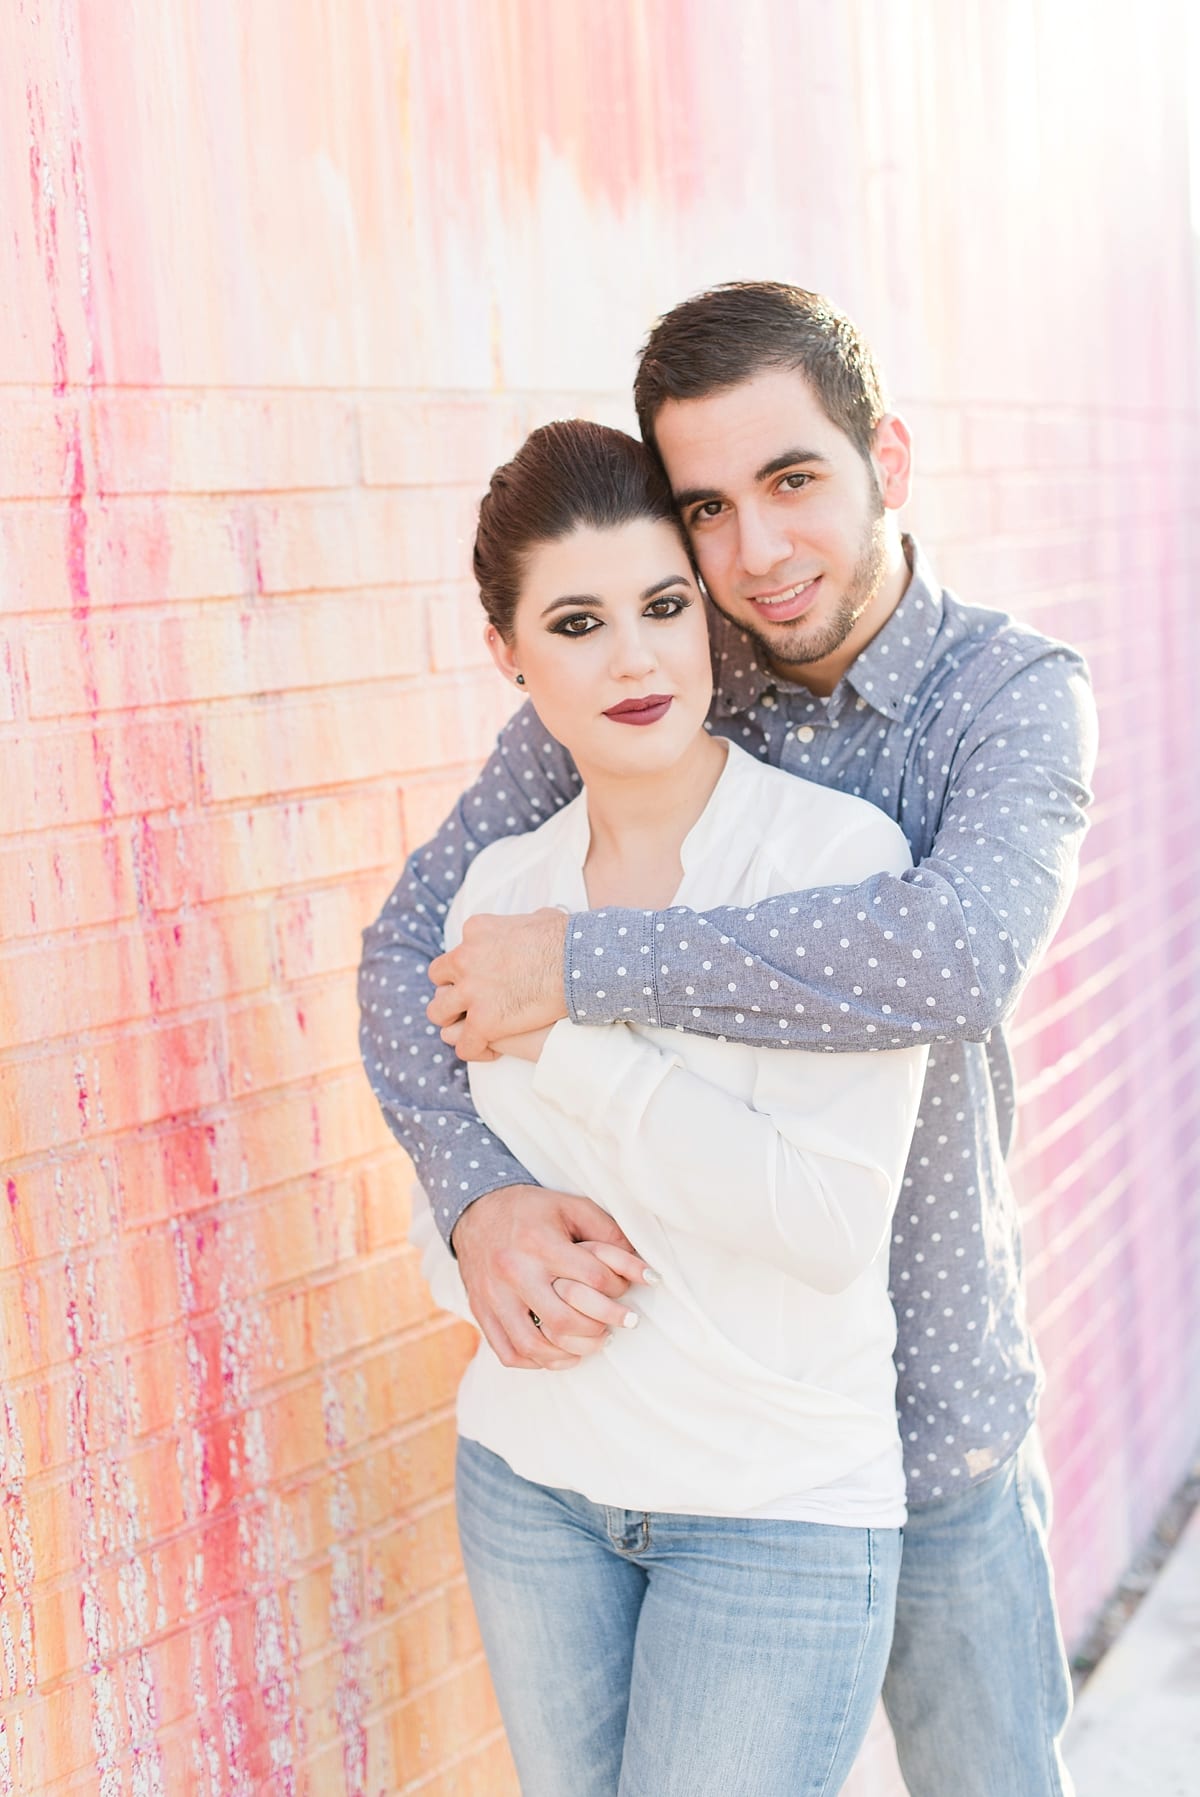 Wynwood-Walls-Engagement-Pictures_0429